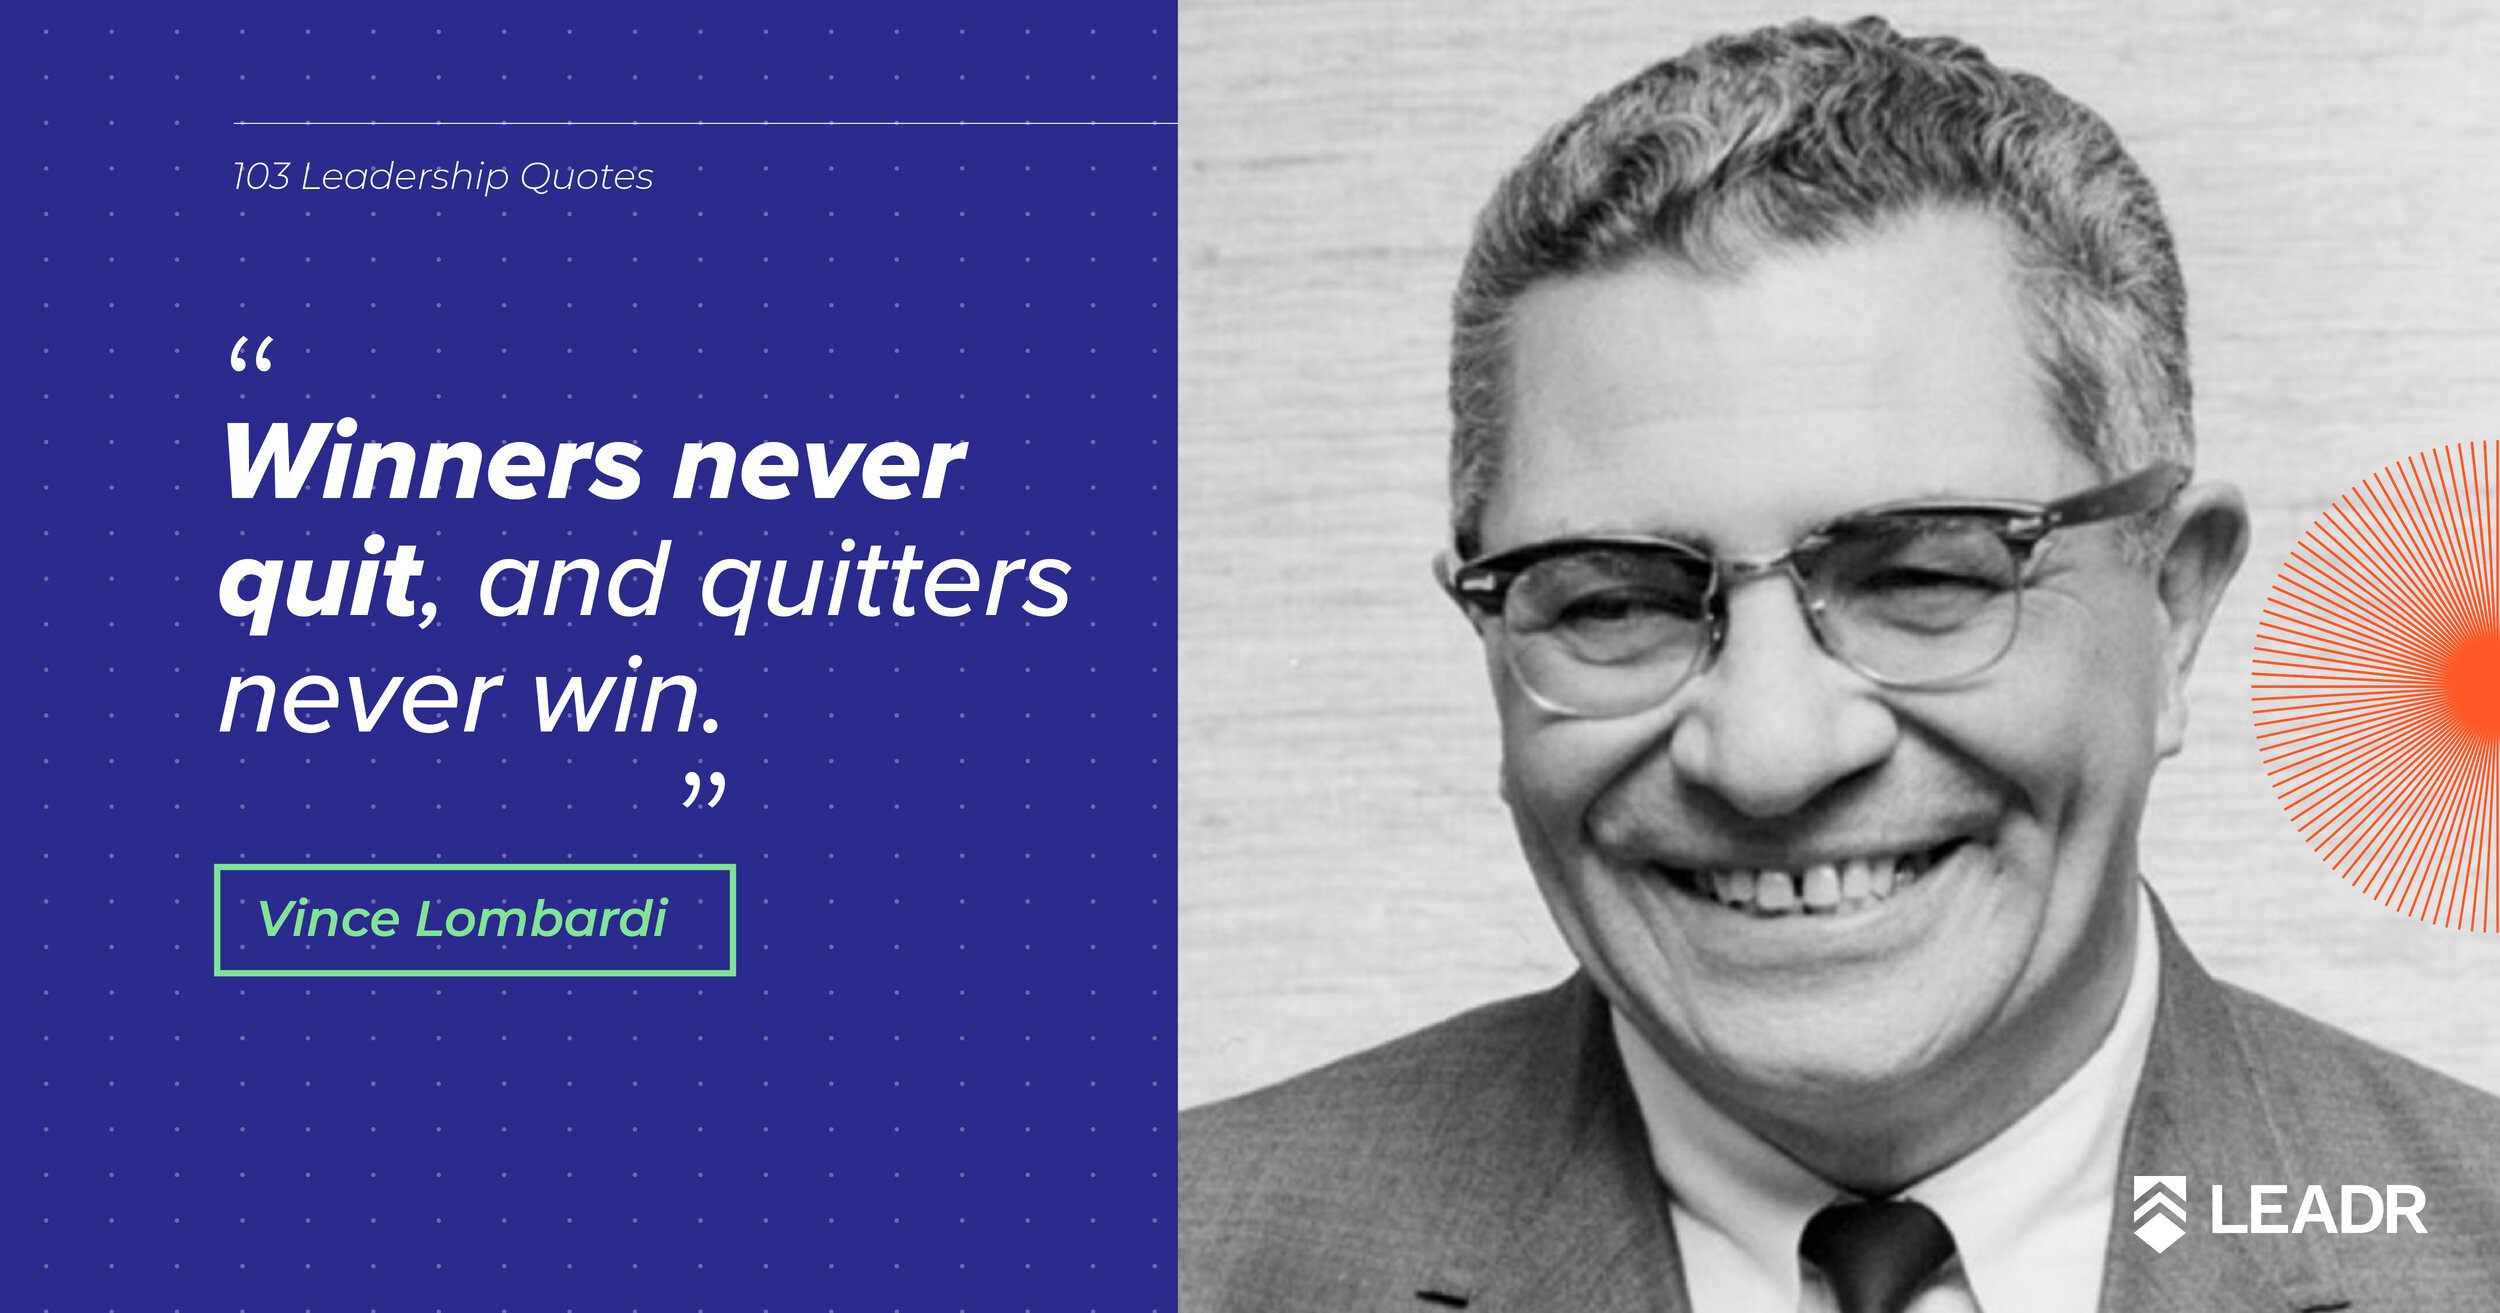 Royalty free downloadable leadership quotes - Vince Lombardi